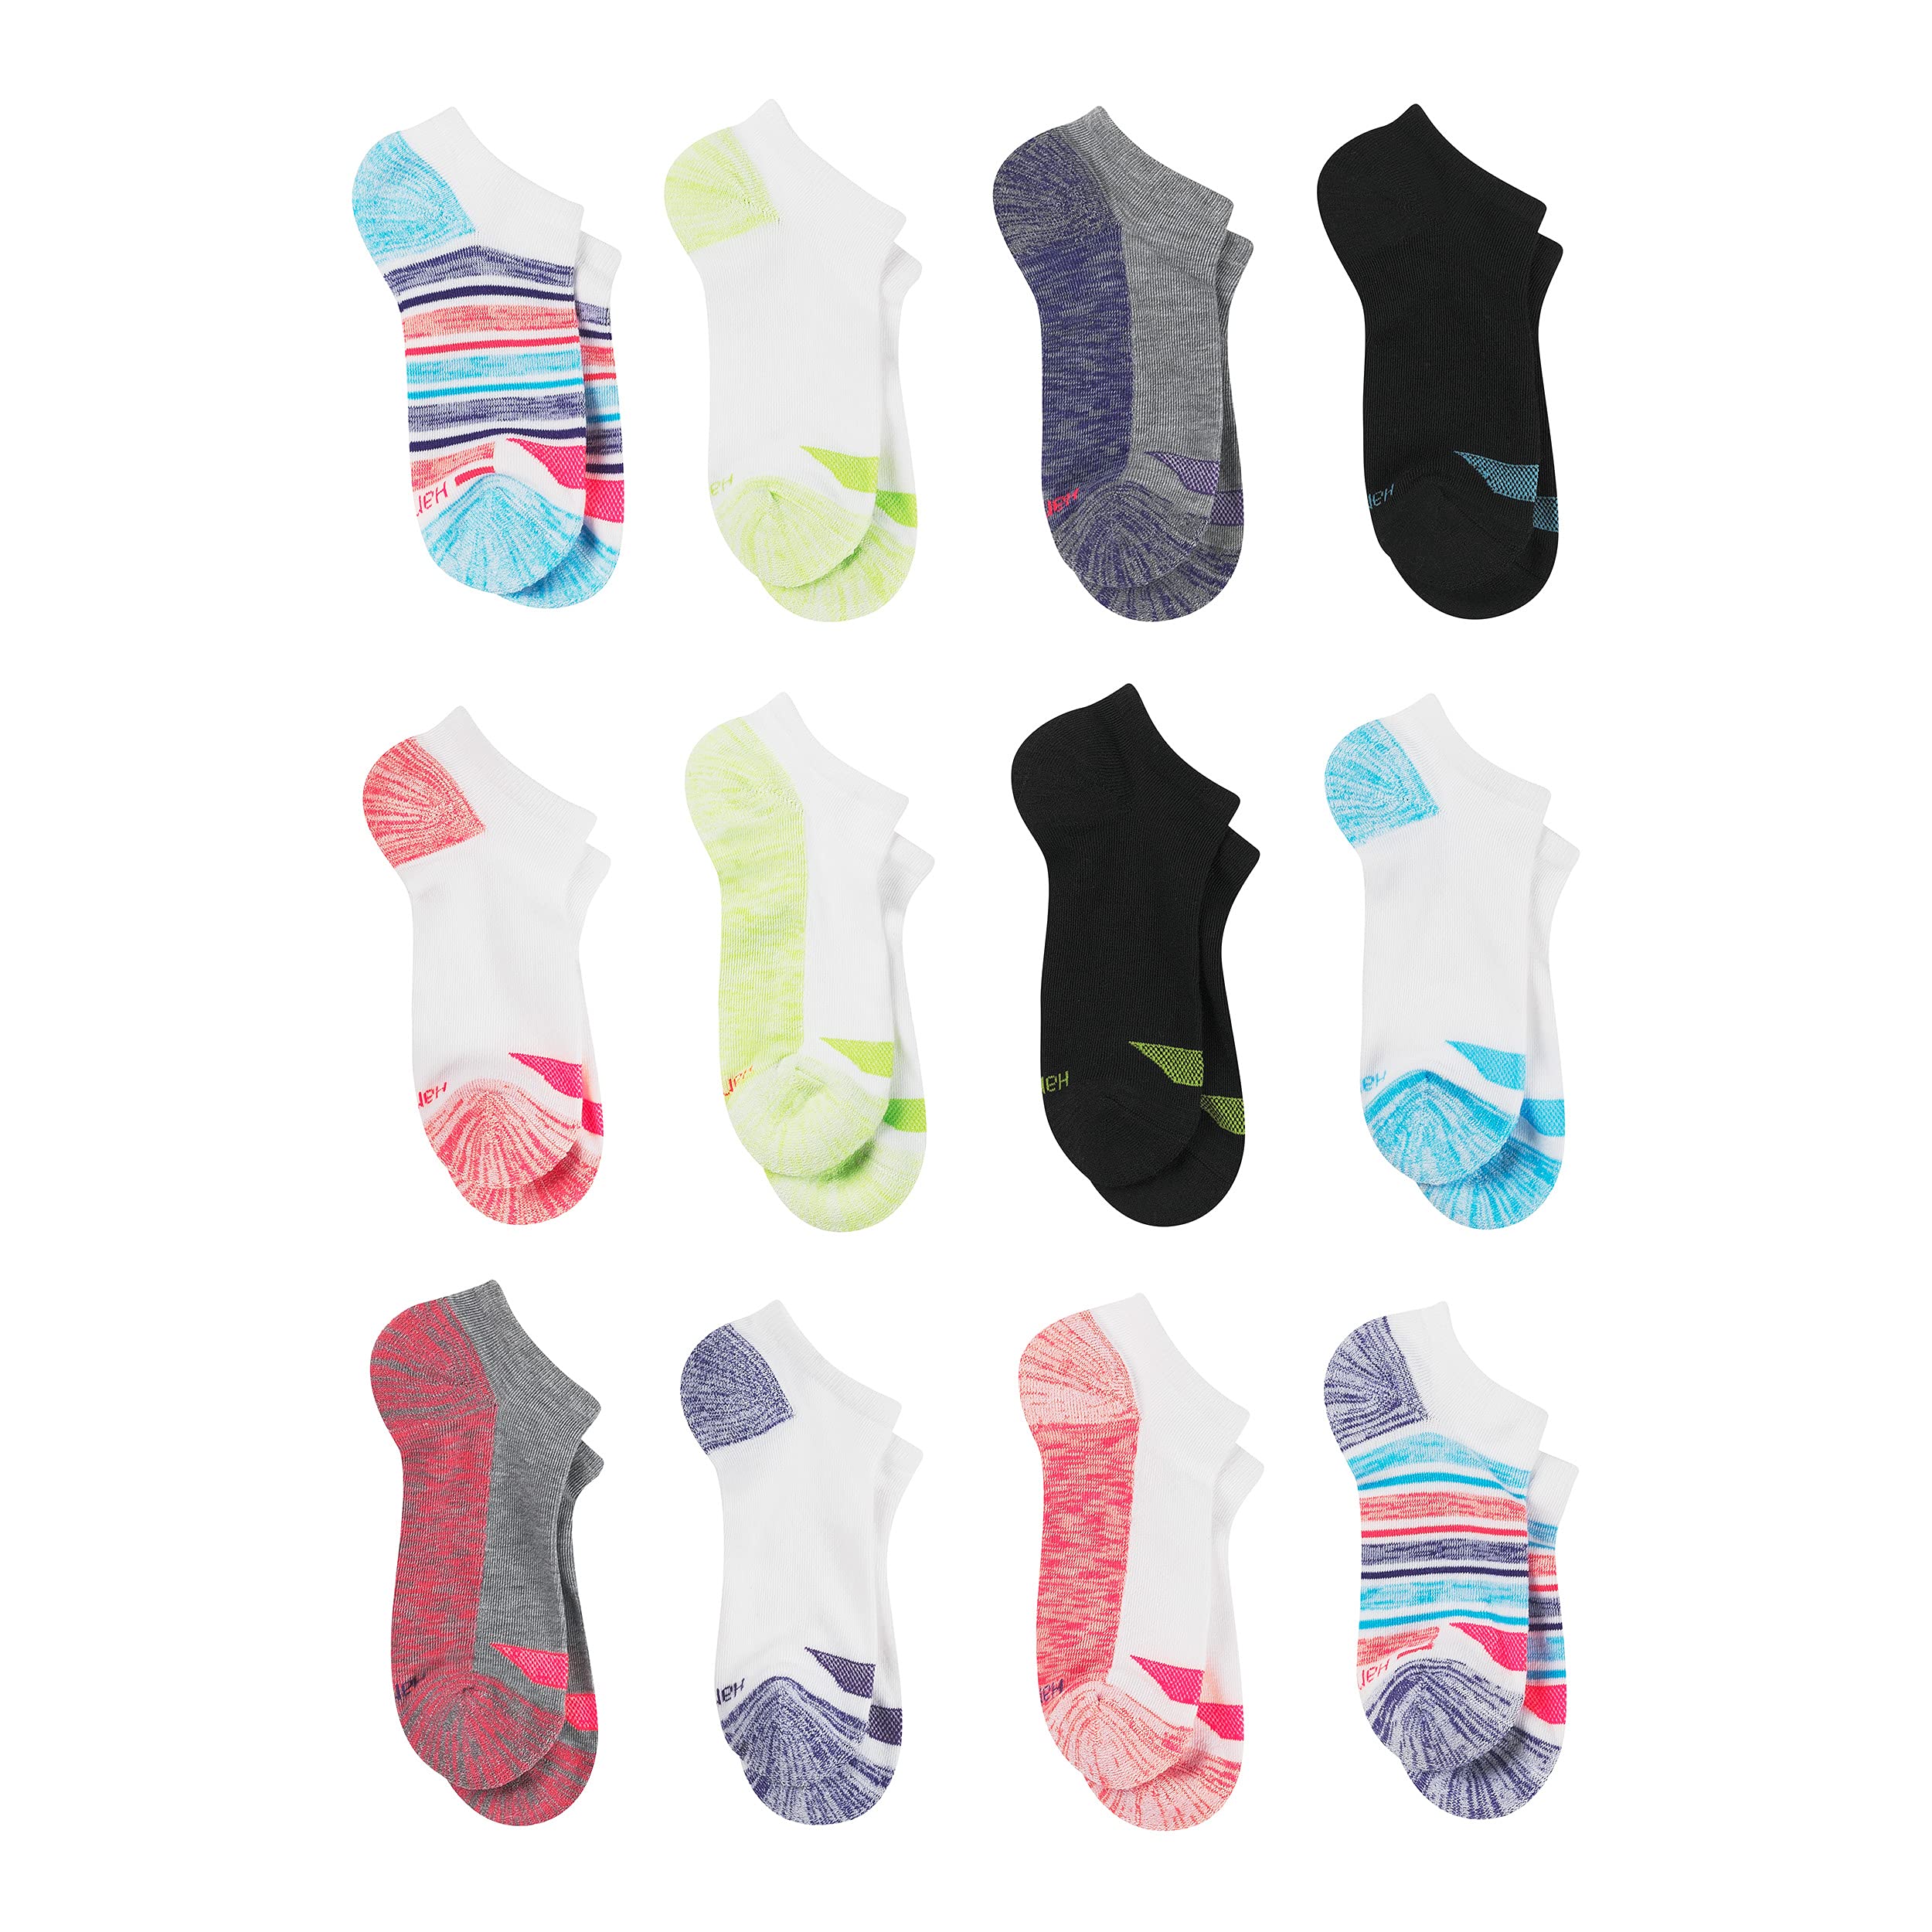 Hanes Girls’ Socks, Ankle and No Show Cool Comfort BreathableSocks, Multi-Packs